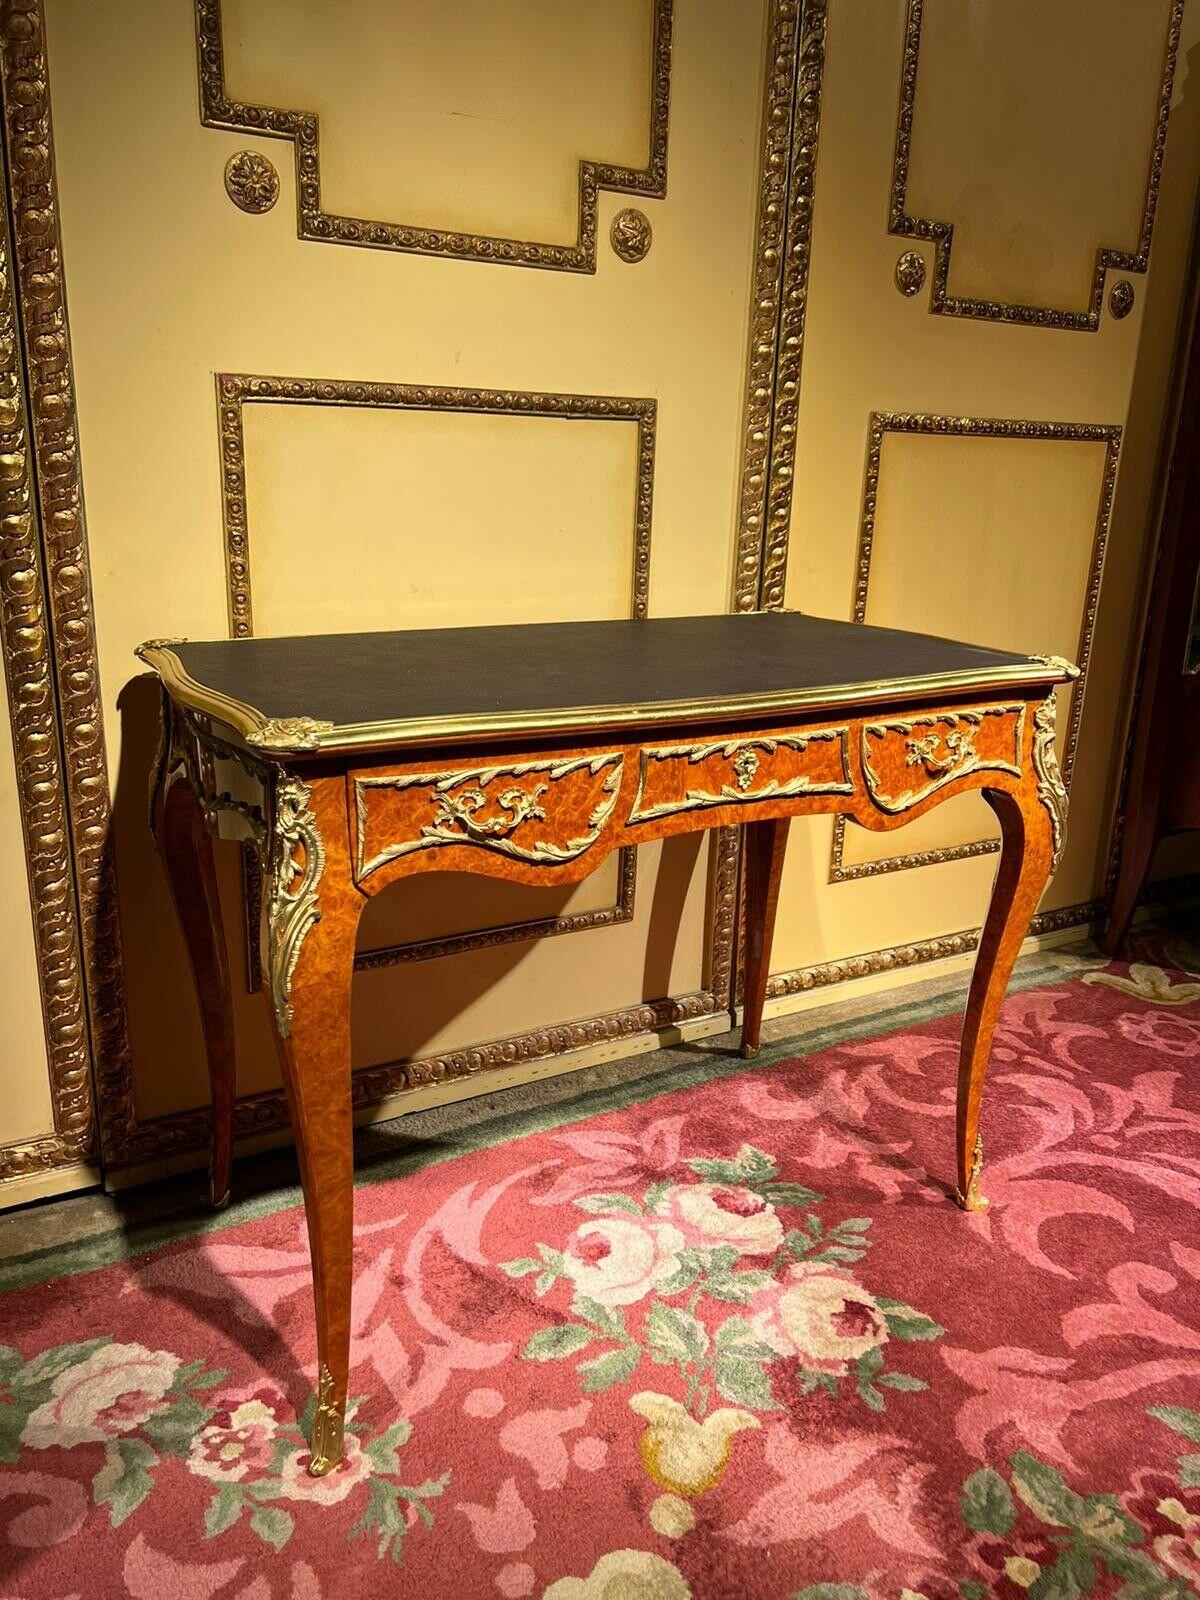 Exclusive Louis XV style ladies bureau plat/desk

Solid beech wood with exotic root veneer.

Extremely fine, floral bronze fittings.

Cambered and pronounced/curved wooden body. Four-sided curved frame base.

1 drawer and wide knee